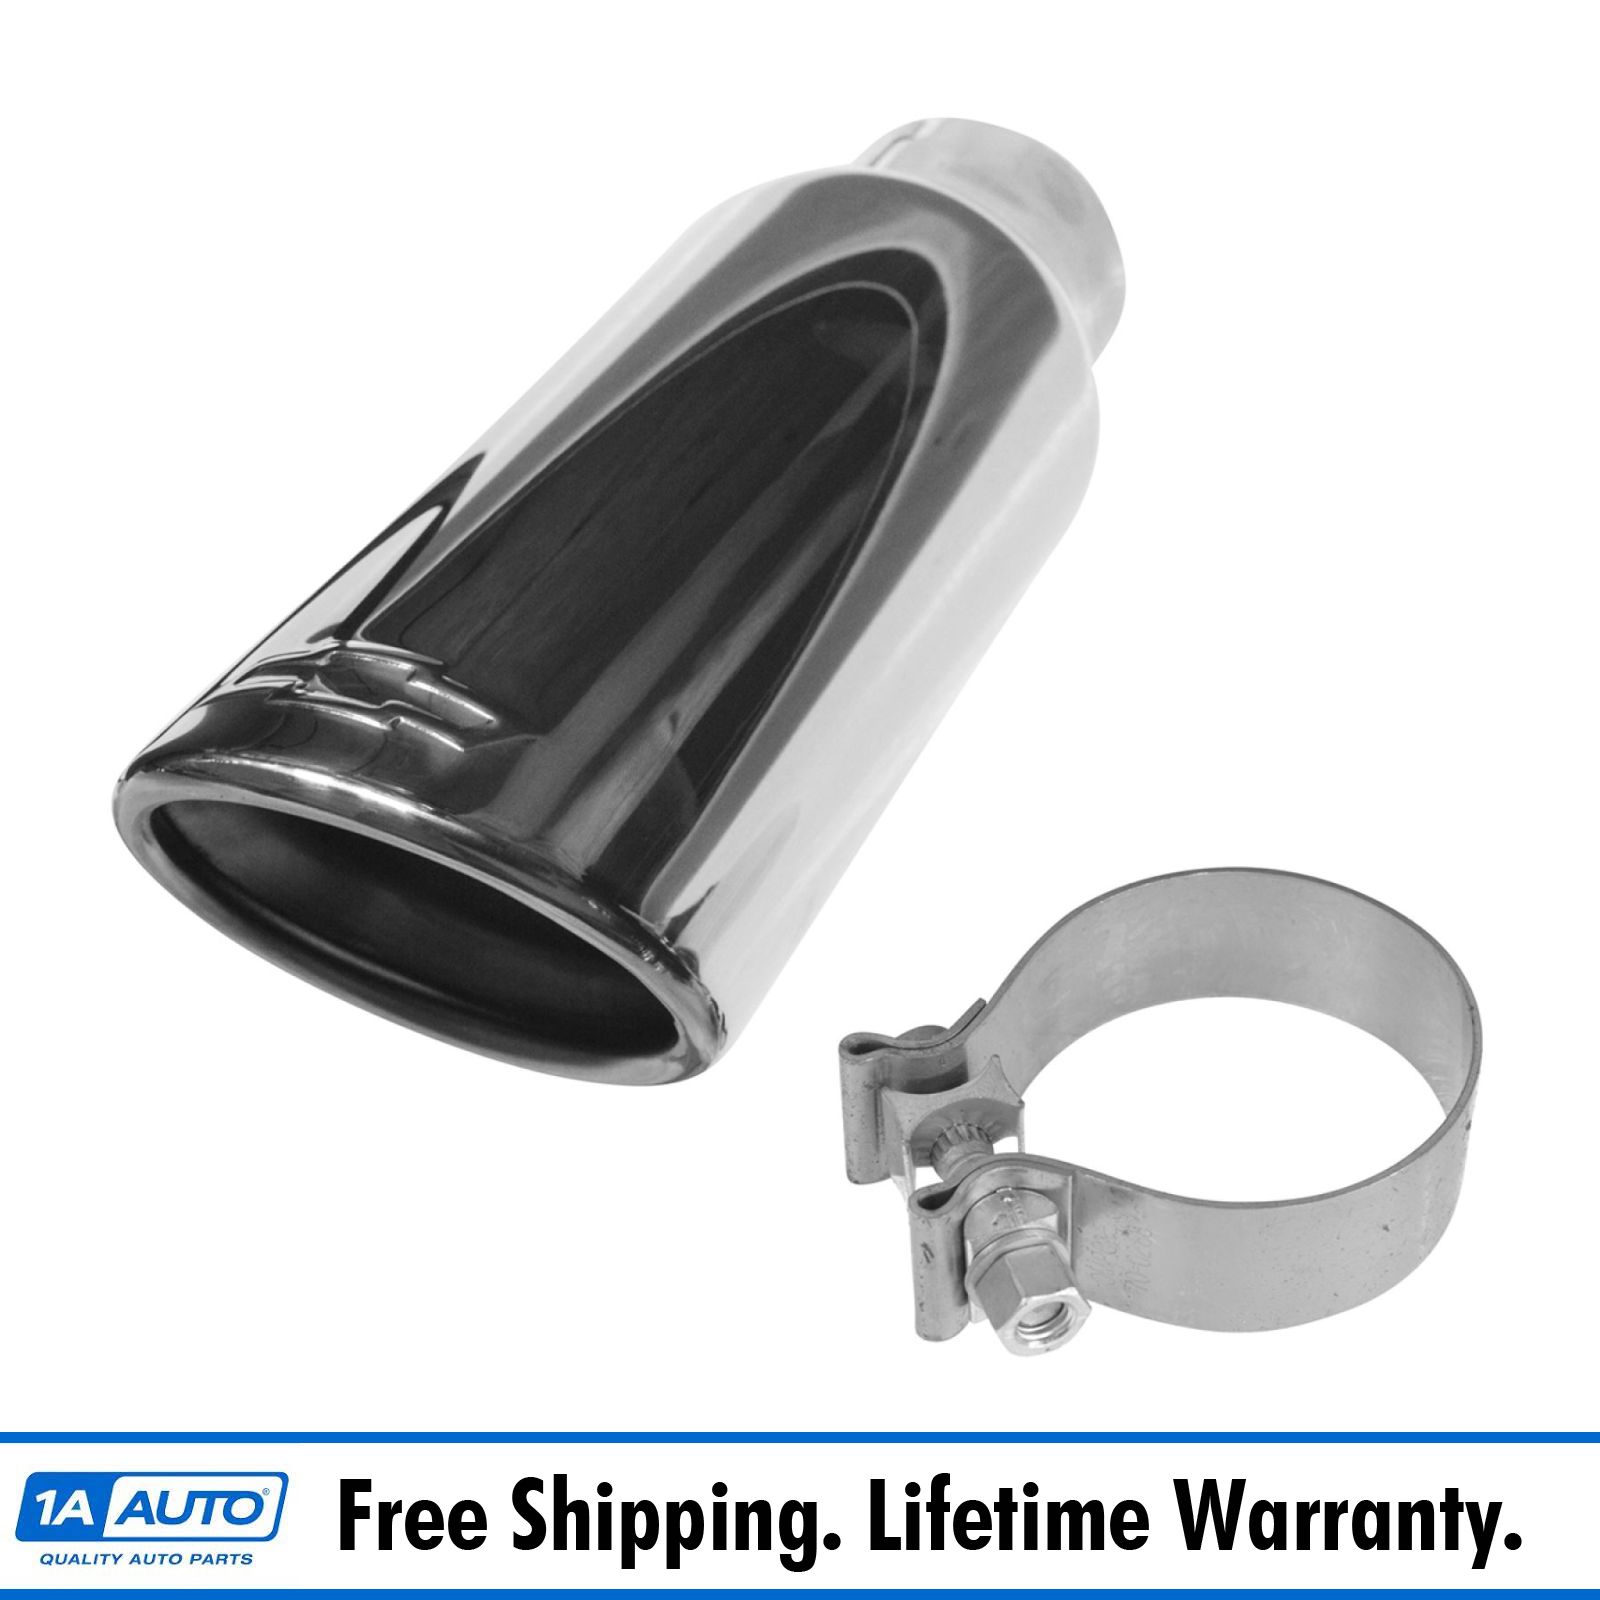 OEM Exhaust Tip & Clamp Chrome Bowtie Etched for Chevy Pickup SUV NEW